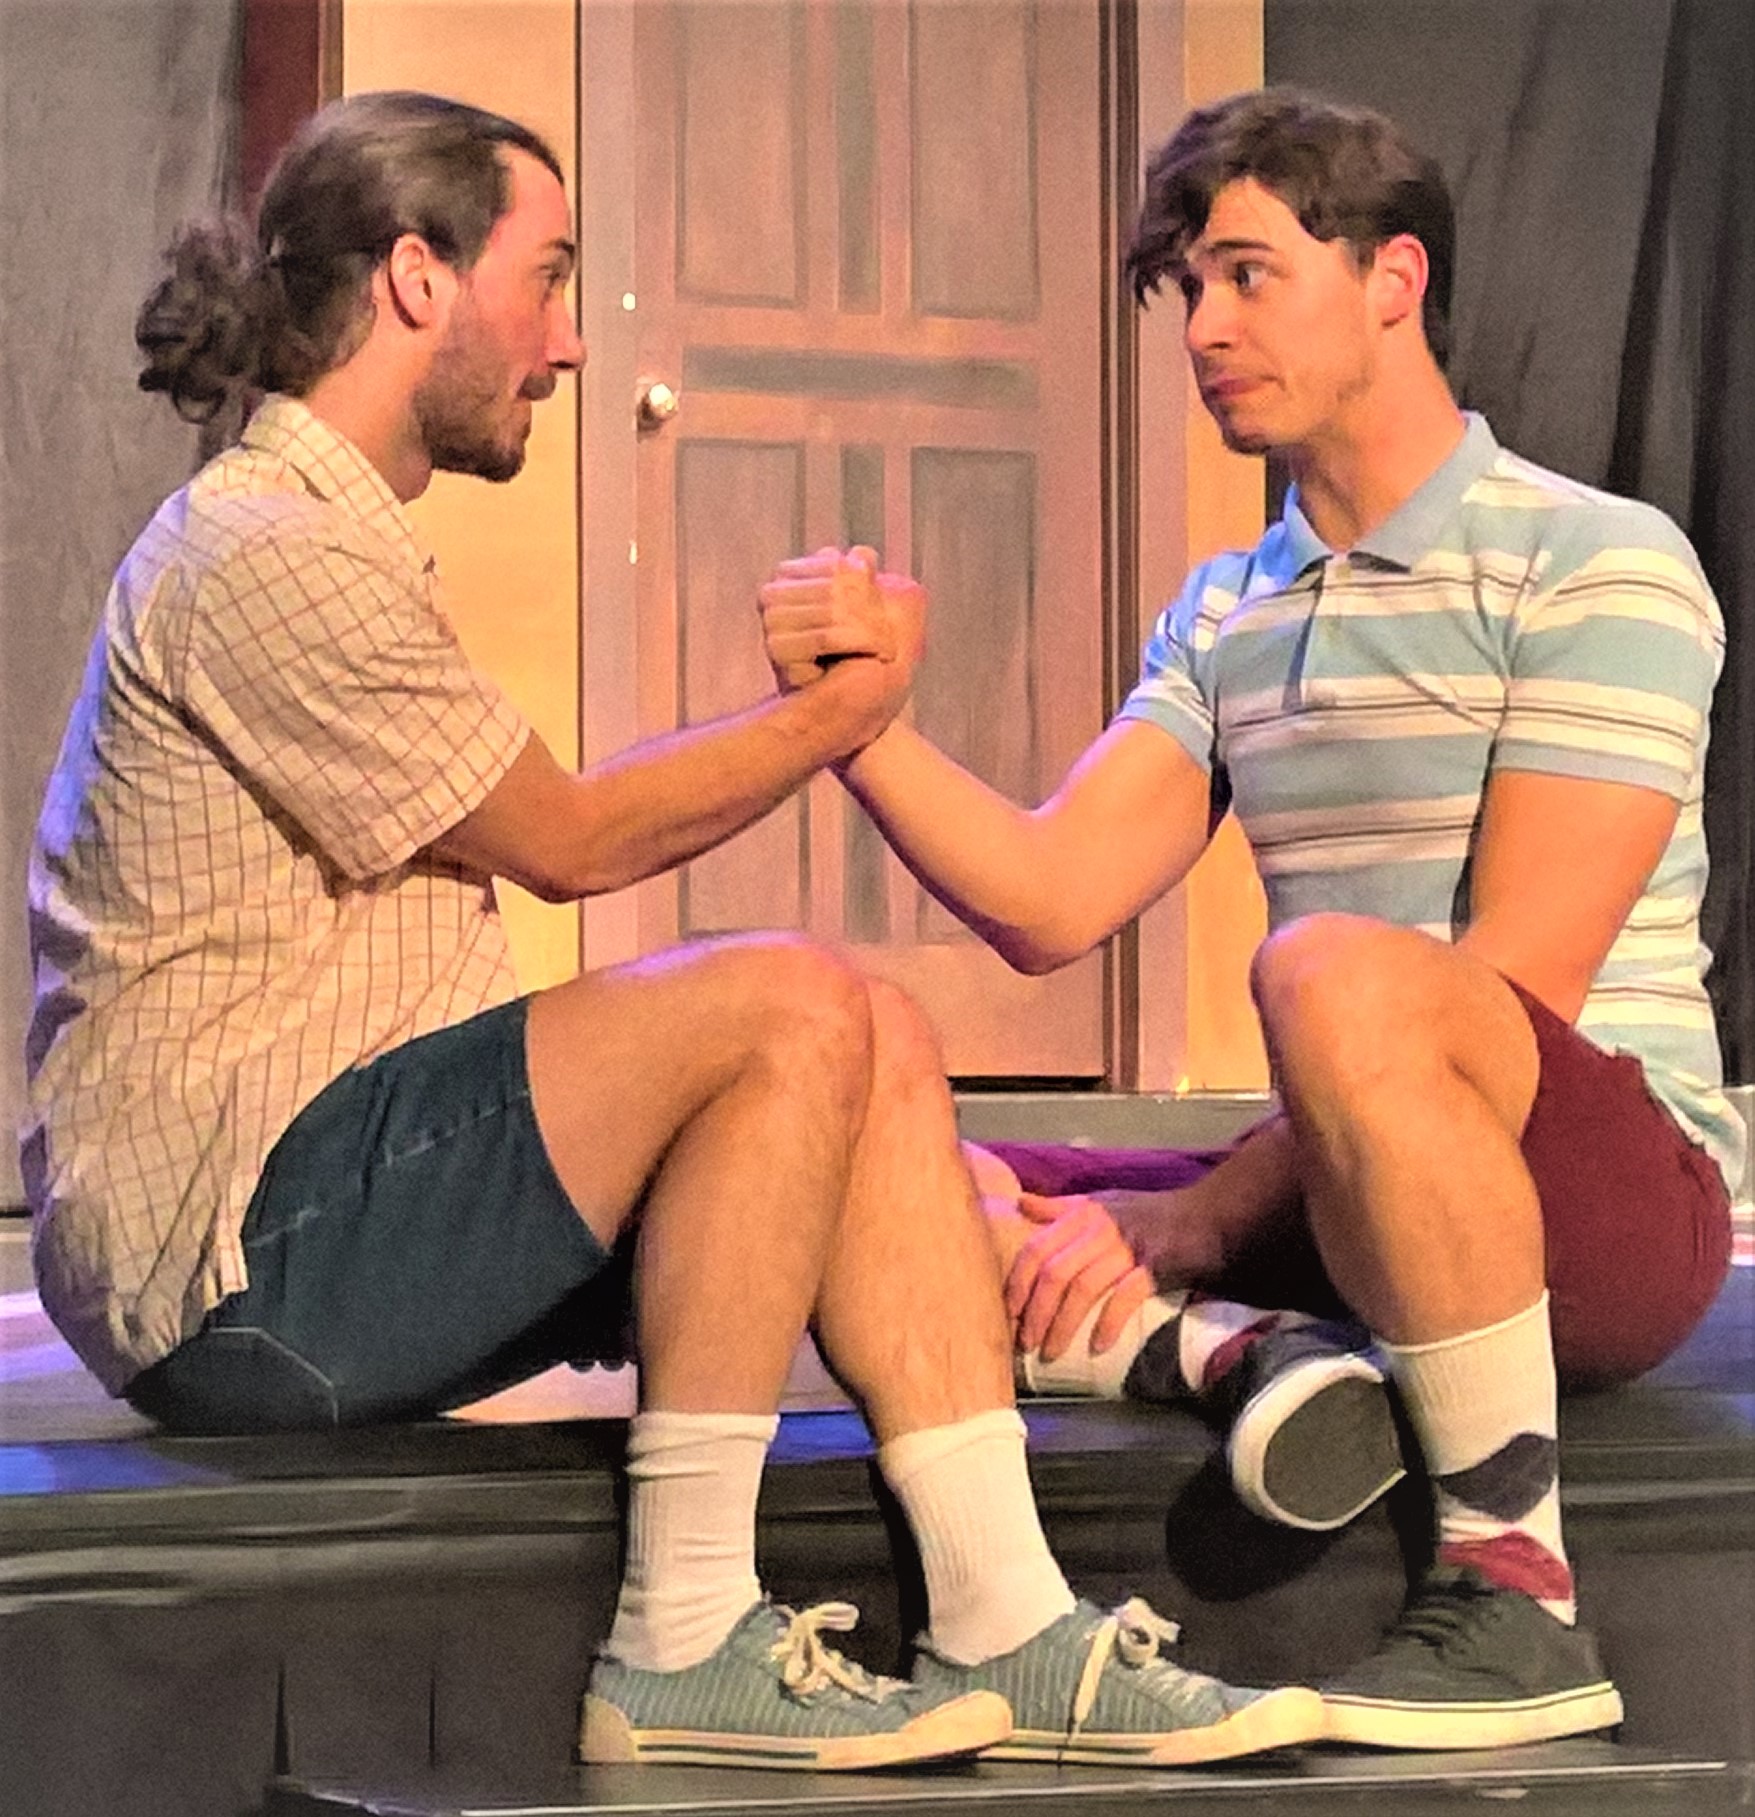 Tyler Hendrix (Mickey) [L] and Richie Stone (Edward) [R]
bonding as Blood Brothers